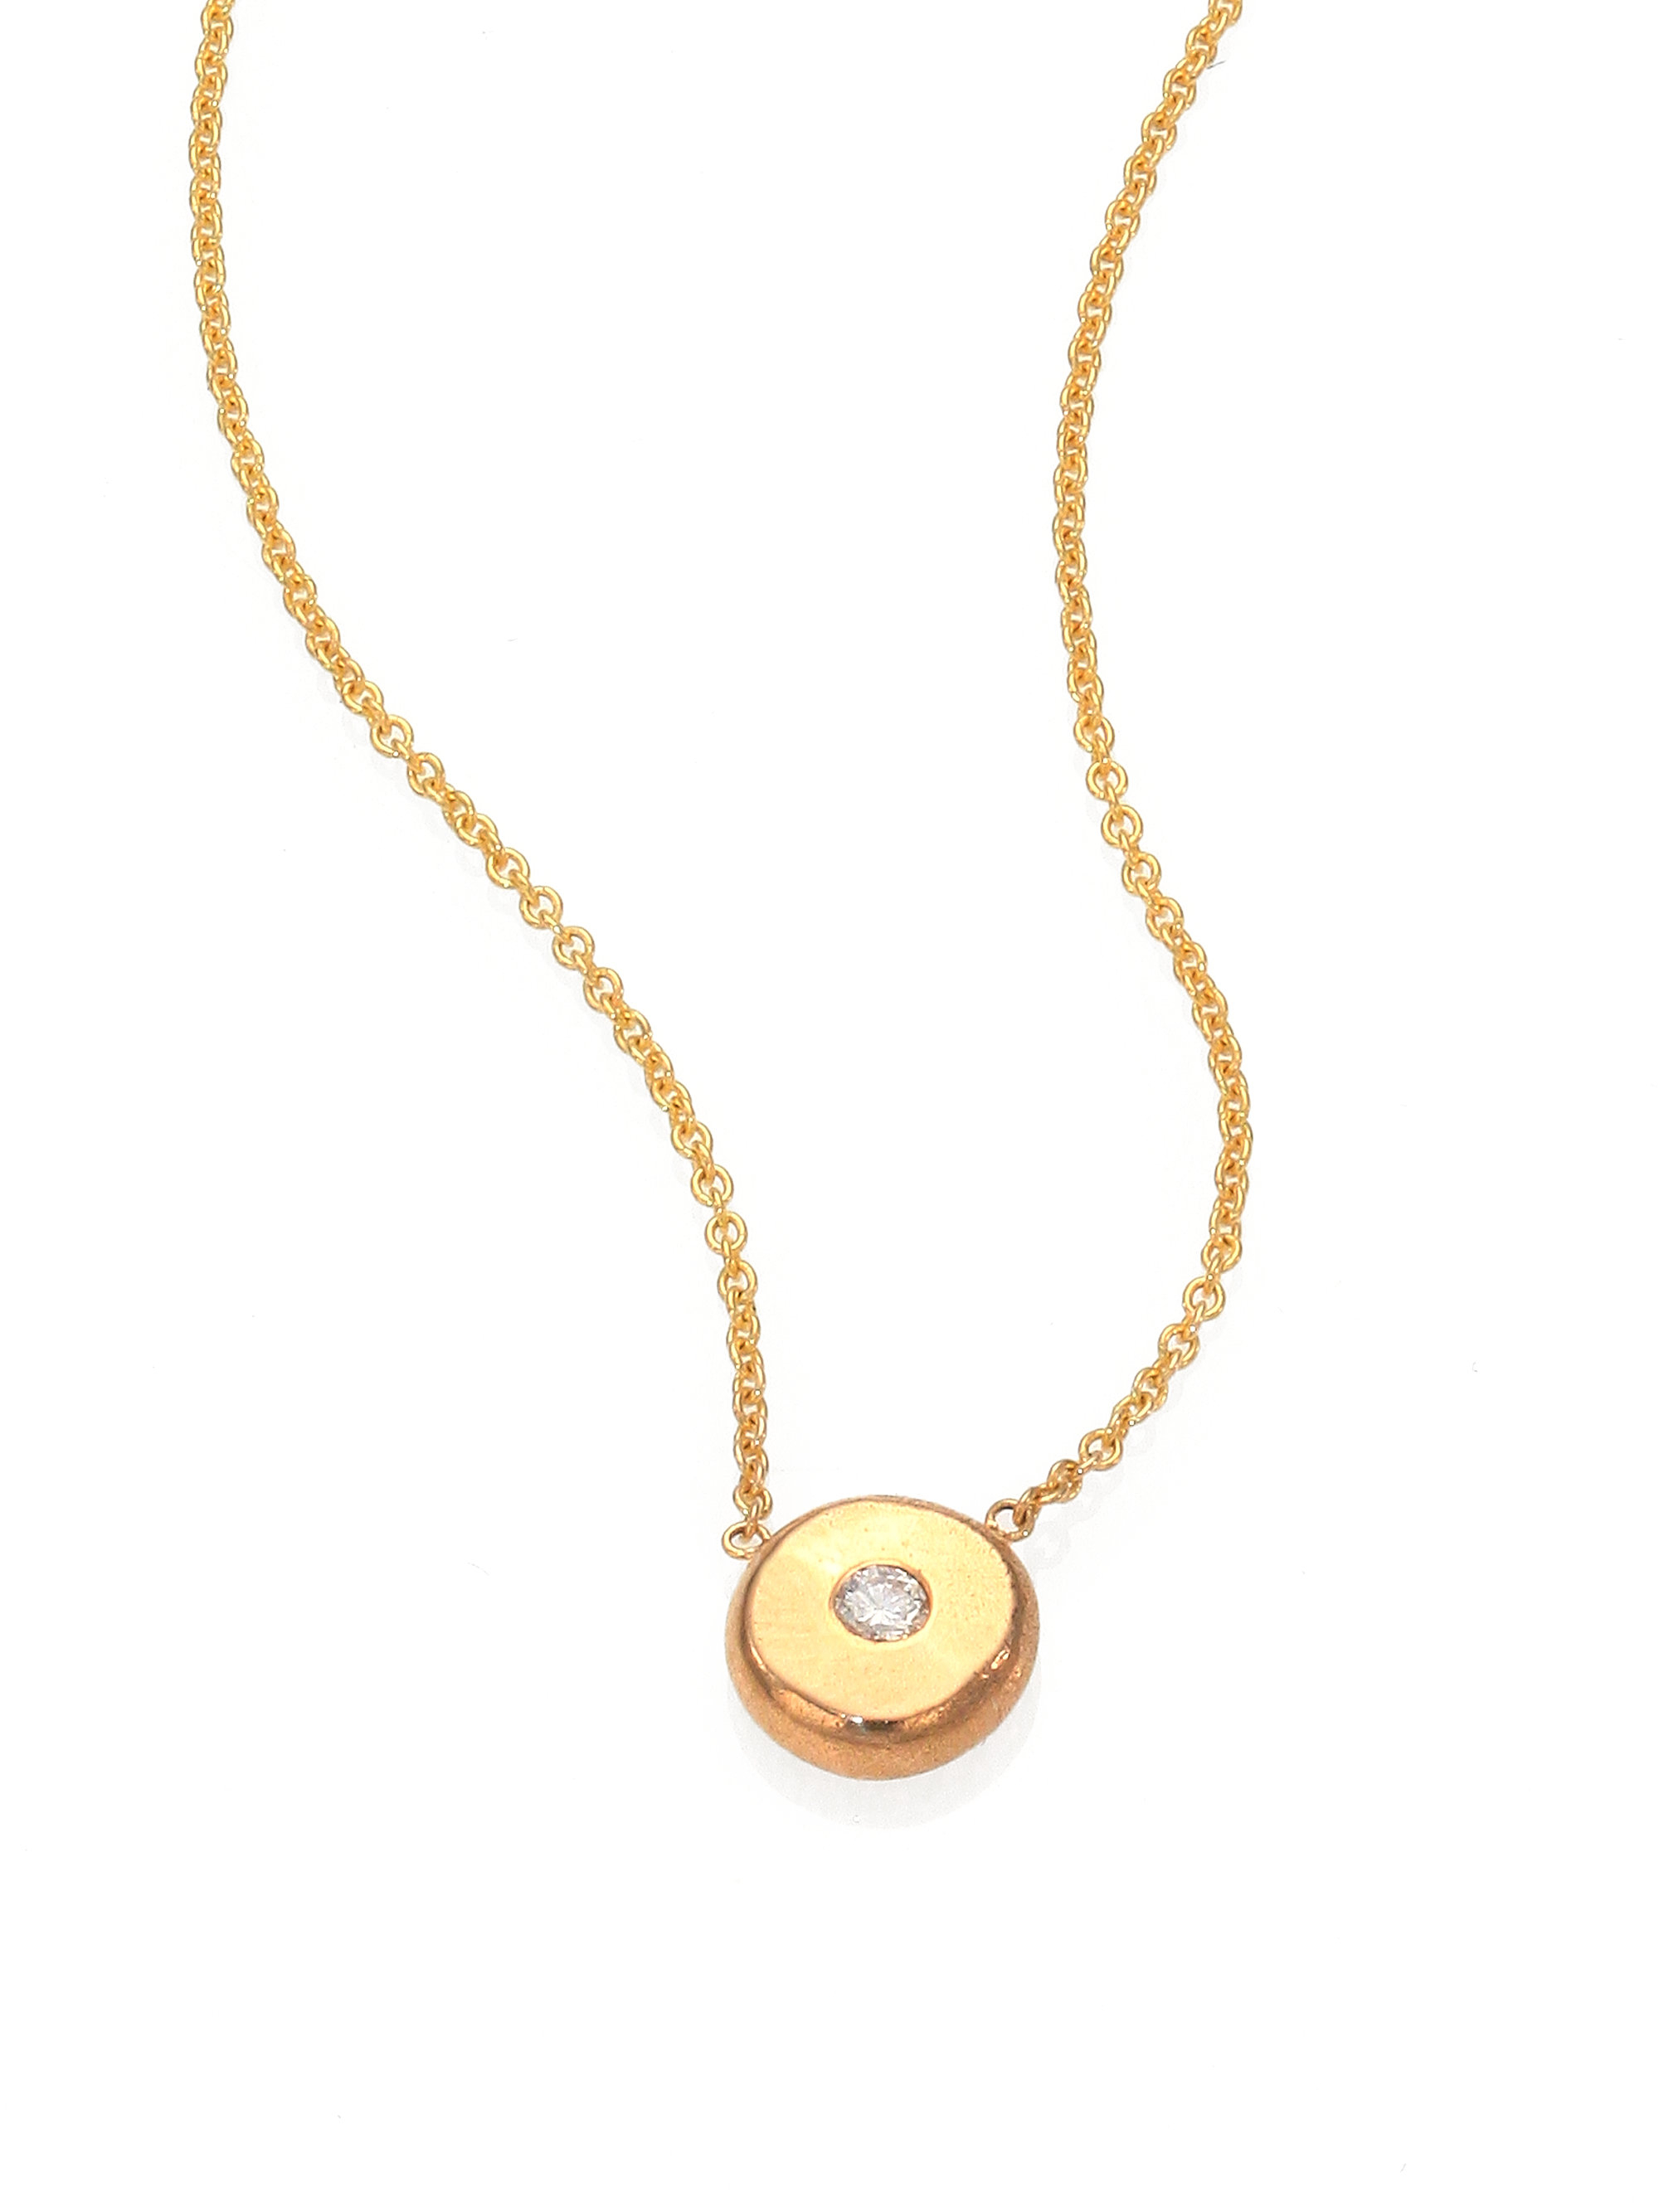 Zoe chicco Diamond & 14k Gold Pendant Necklace in Gold | Lyst